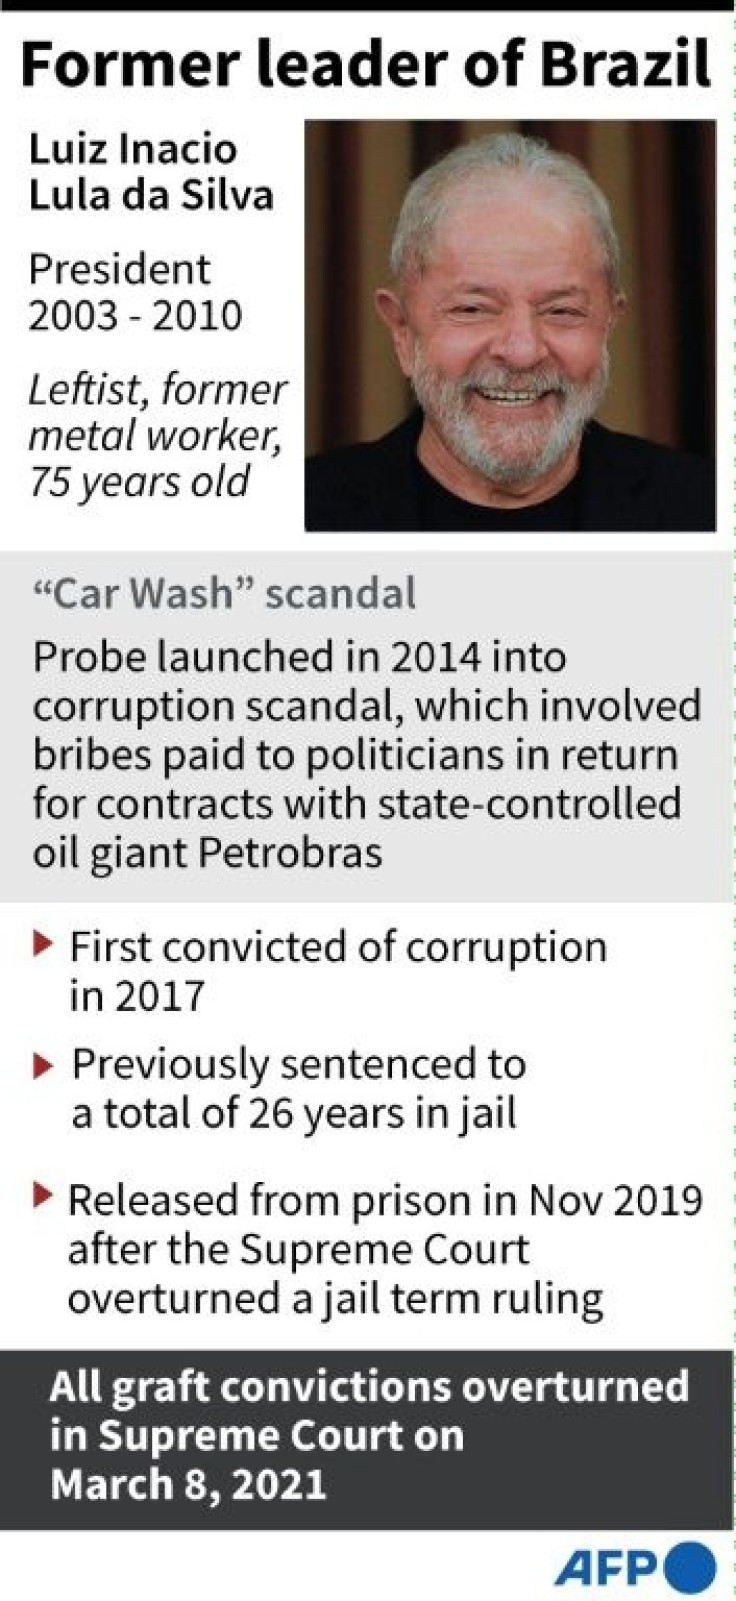 Factfile on Luiz Inacio Lula da Silva, former president of Brazil, cleared to re-run for the presidency after a judge overturned all his convictions.